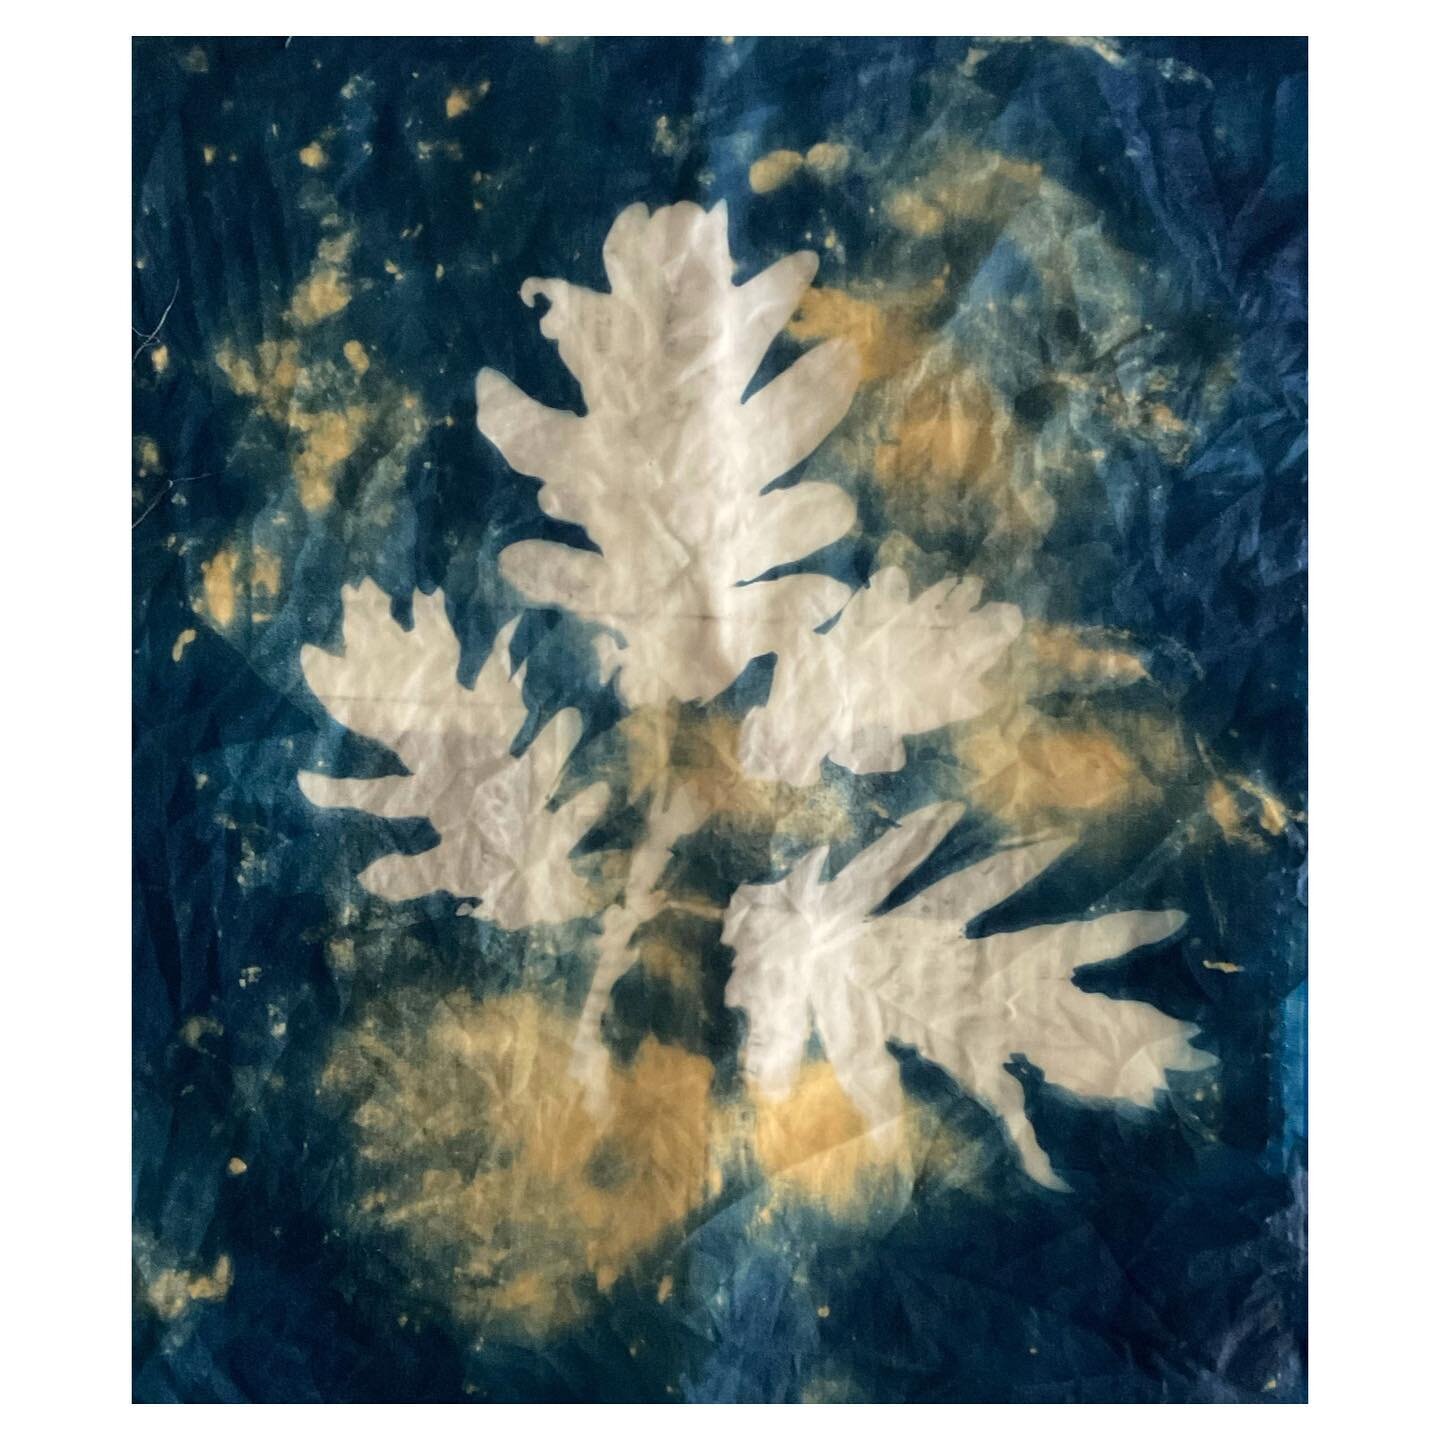 Still wet, just toned #cyanotype on fabric of #oak leaves, patiently waiting to be embroidered! Swipe to see the much lighter dry version

#cyanotypeonfabric #oakleaf #altphotoarchive #todaysalternative #cameraless #solarprint #printmaking #cyanotype